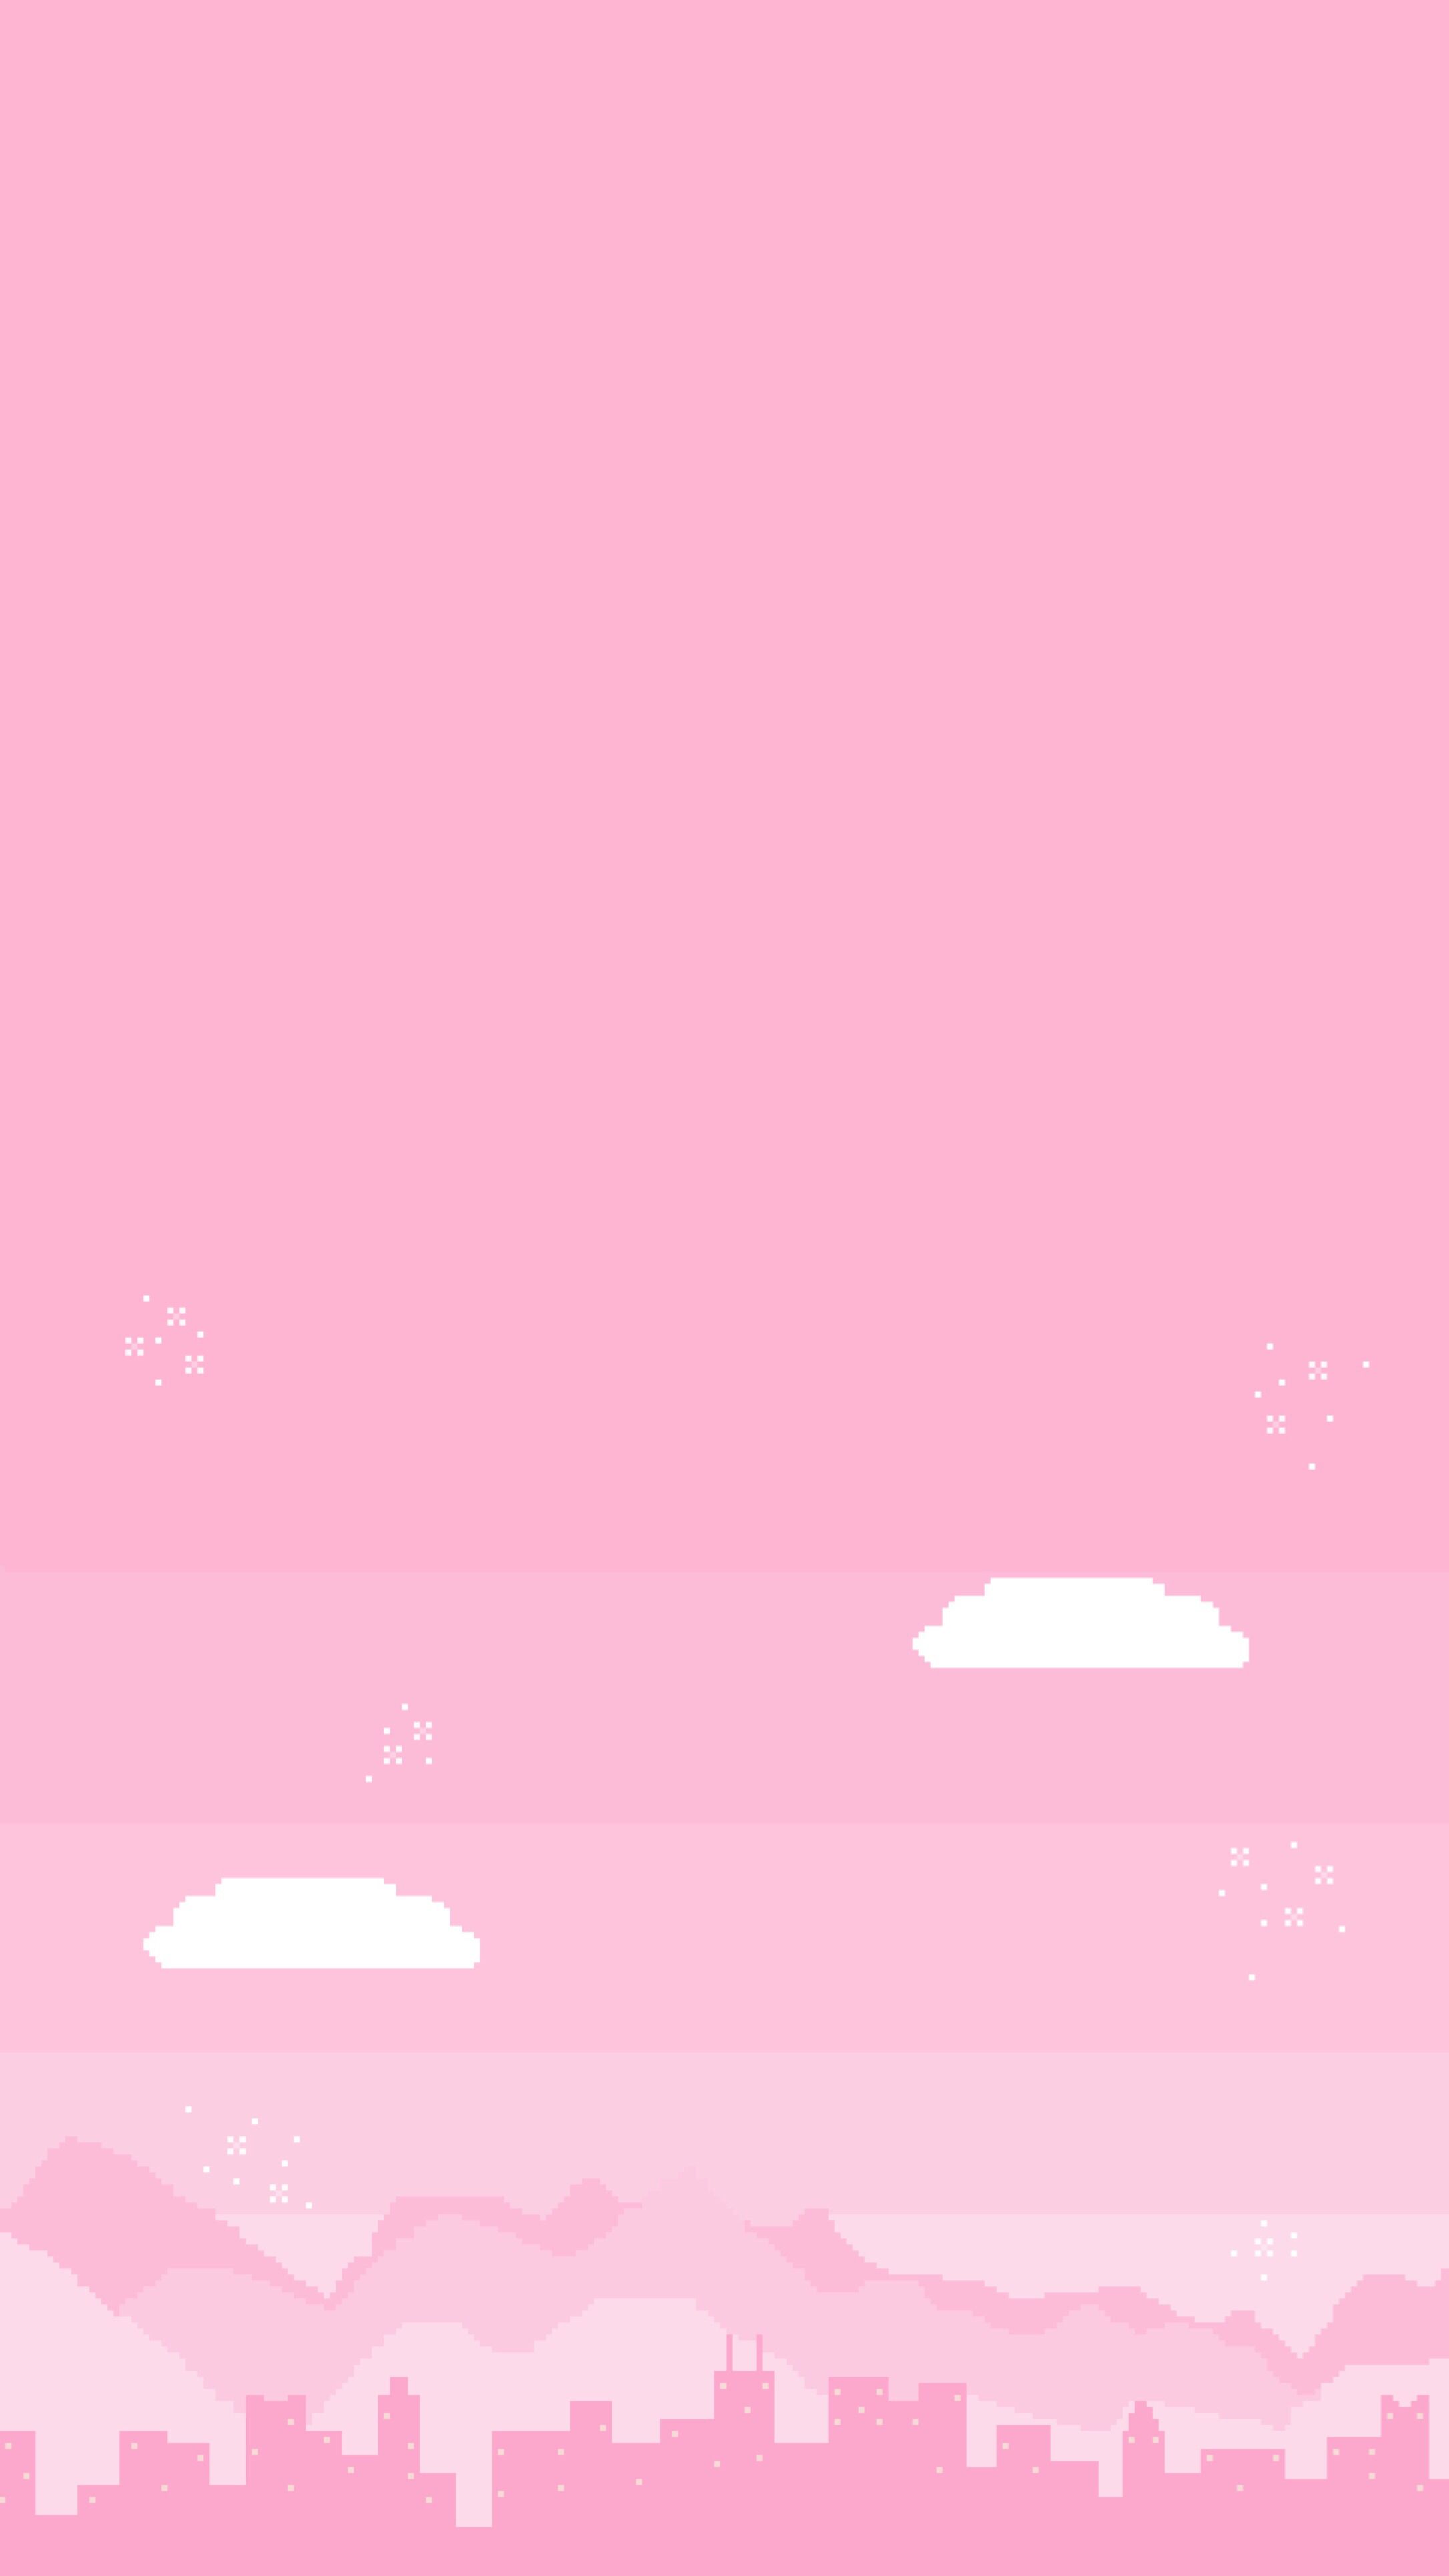 A pink sky with clouds and stars above a city - Pink, pastel pink